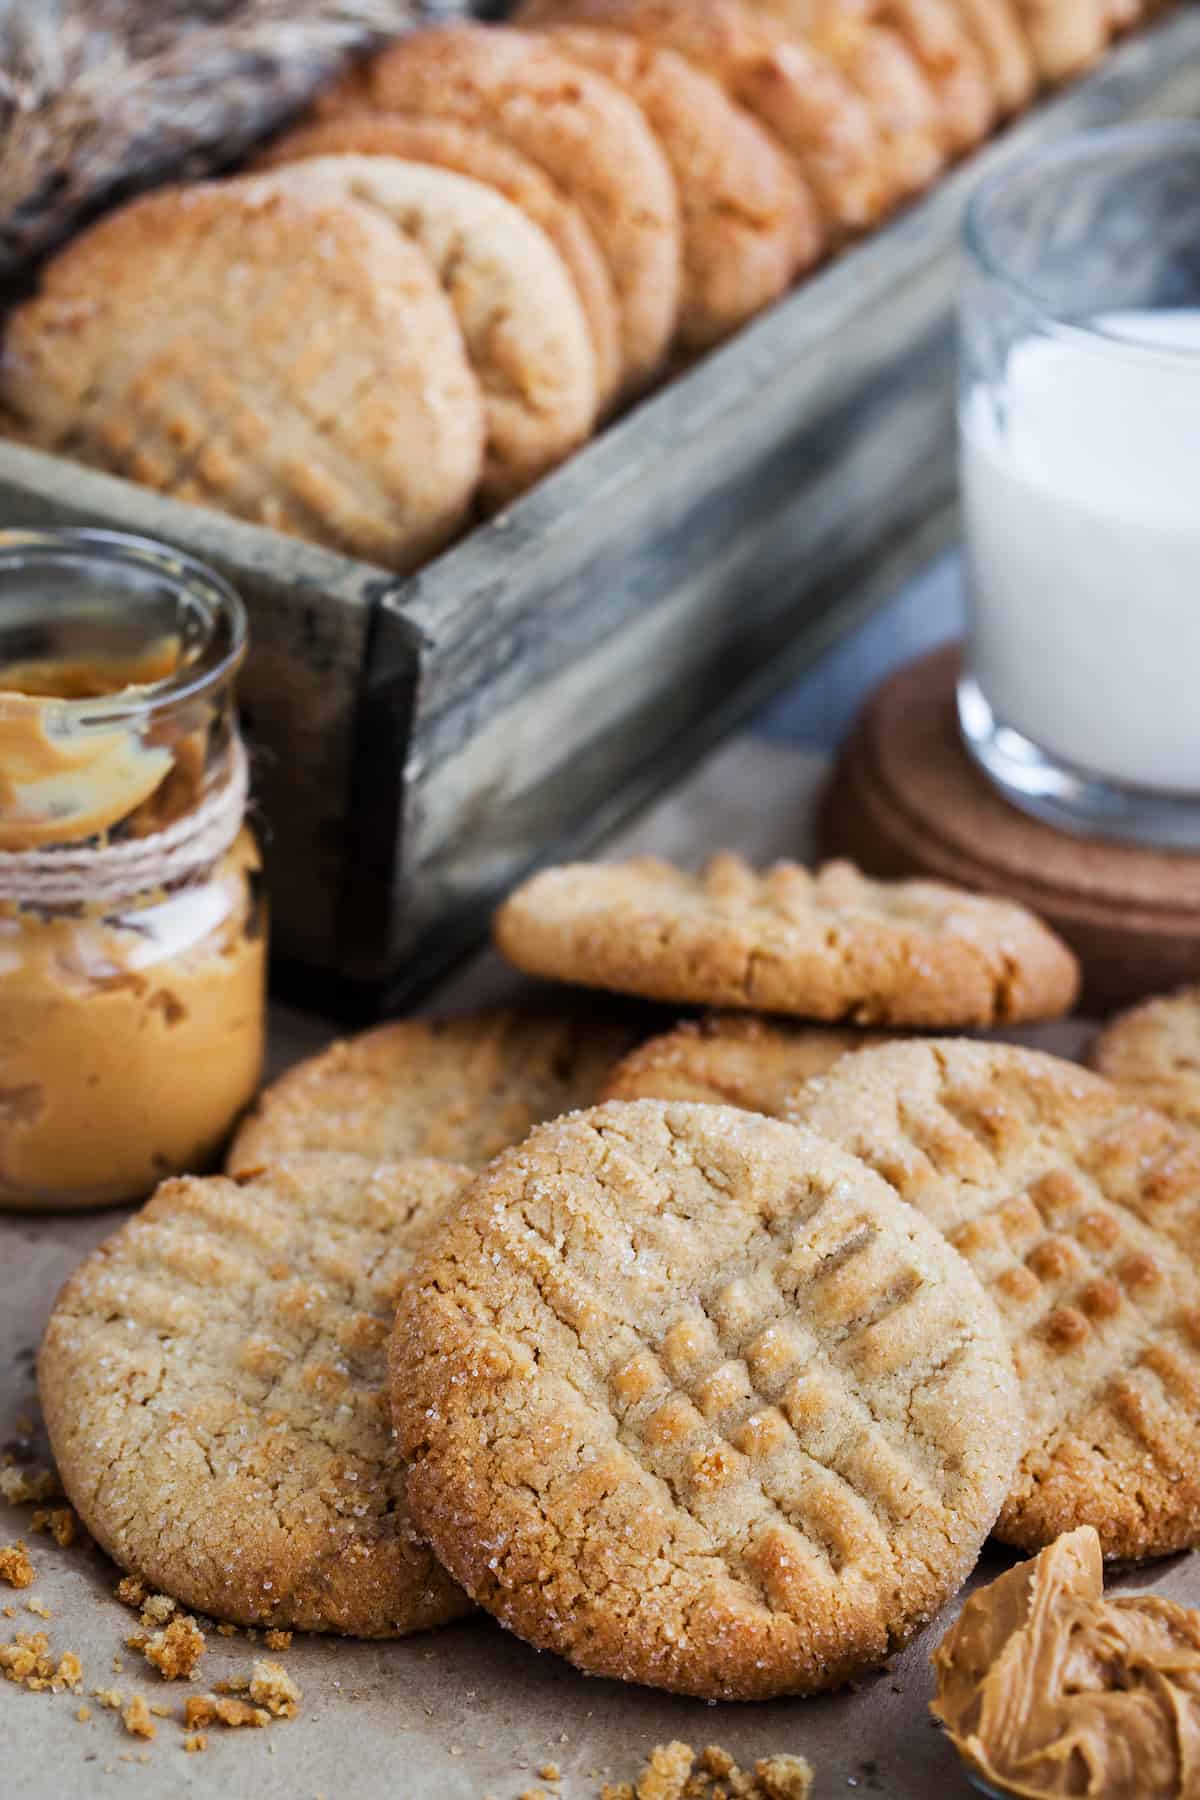 A pile of peanut butter cookies next to a glass of milk